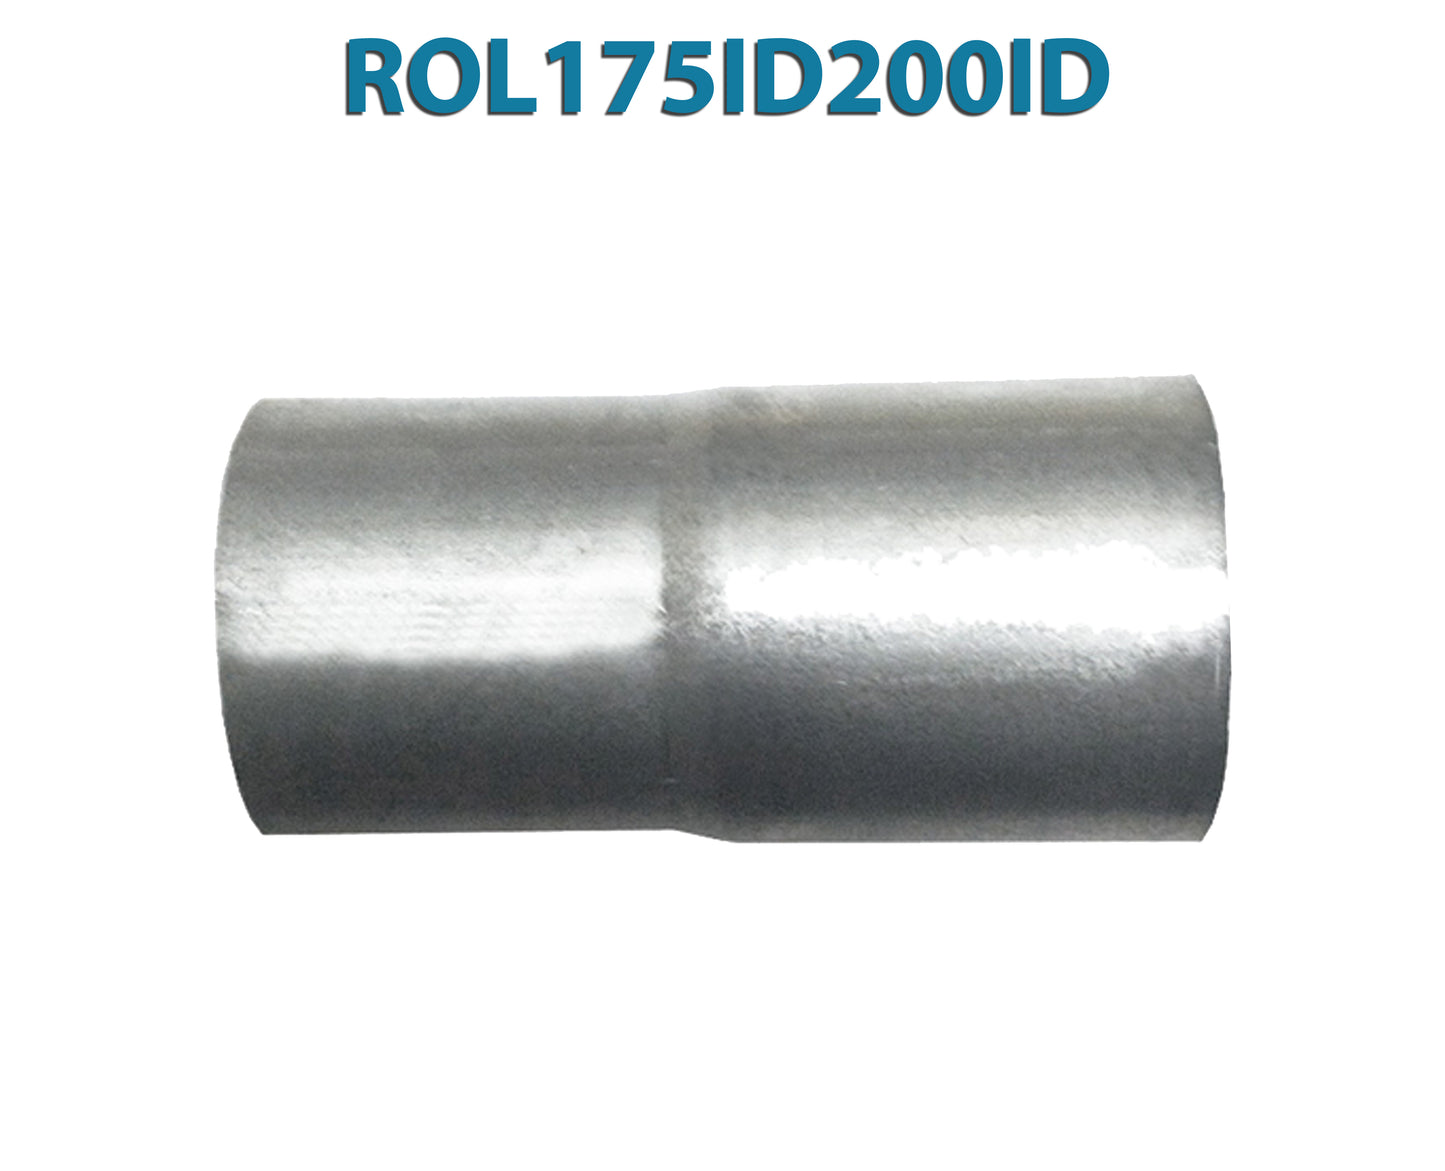 ROL175ID200ID 548503 1 3/4” ID to 2” ID Universal Exhaust Pipe to Pipe Adapter Reducer